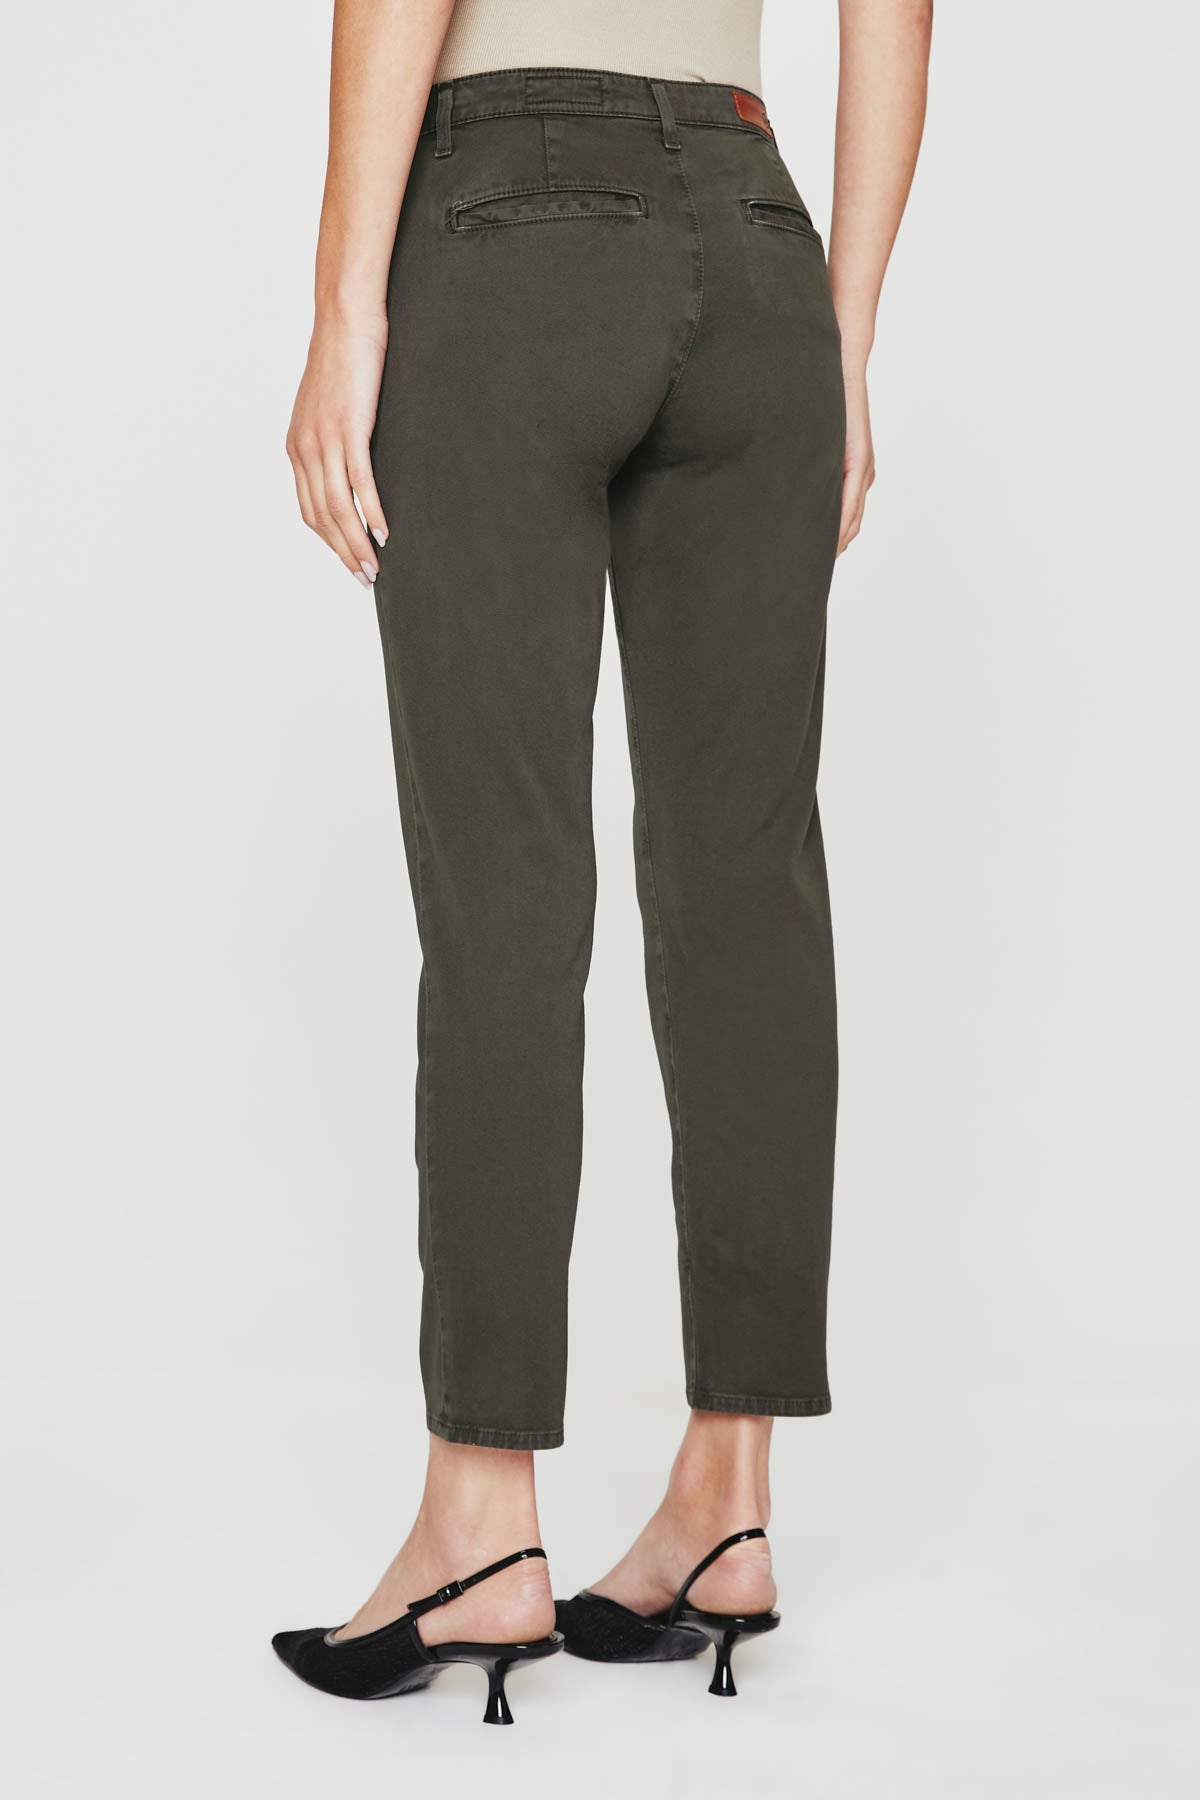 CADEN TAILORED TROUSER IN SULFUR STONE BROWN